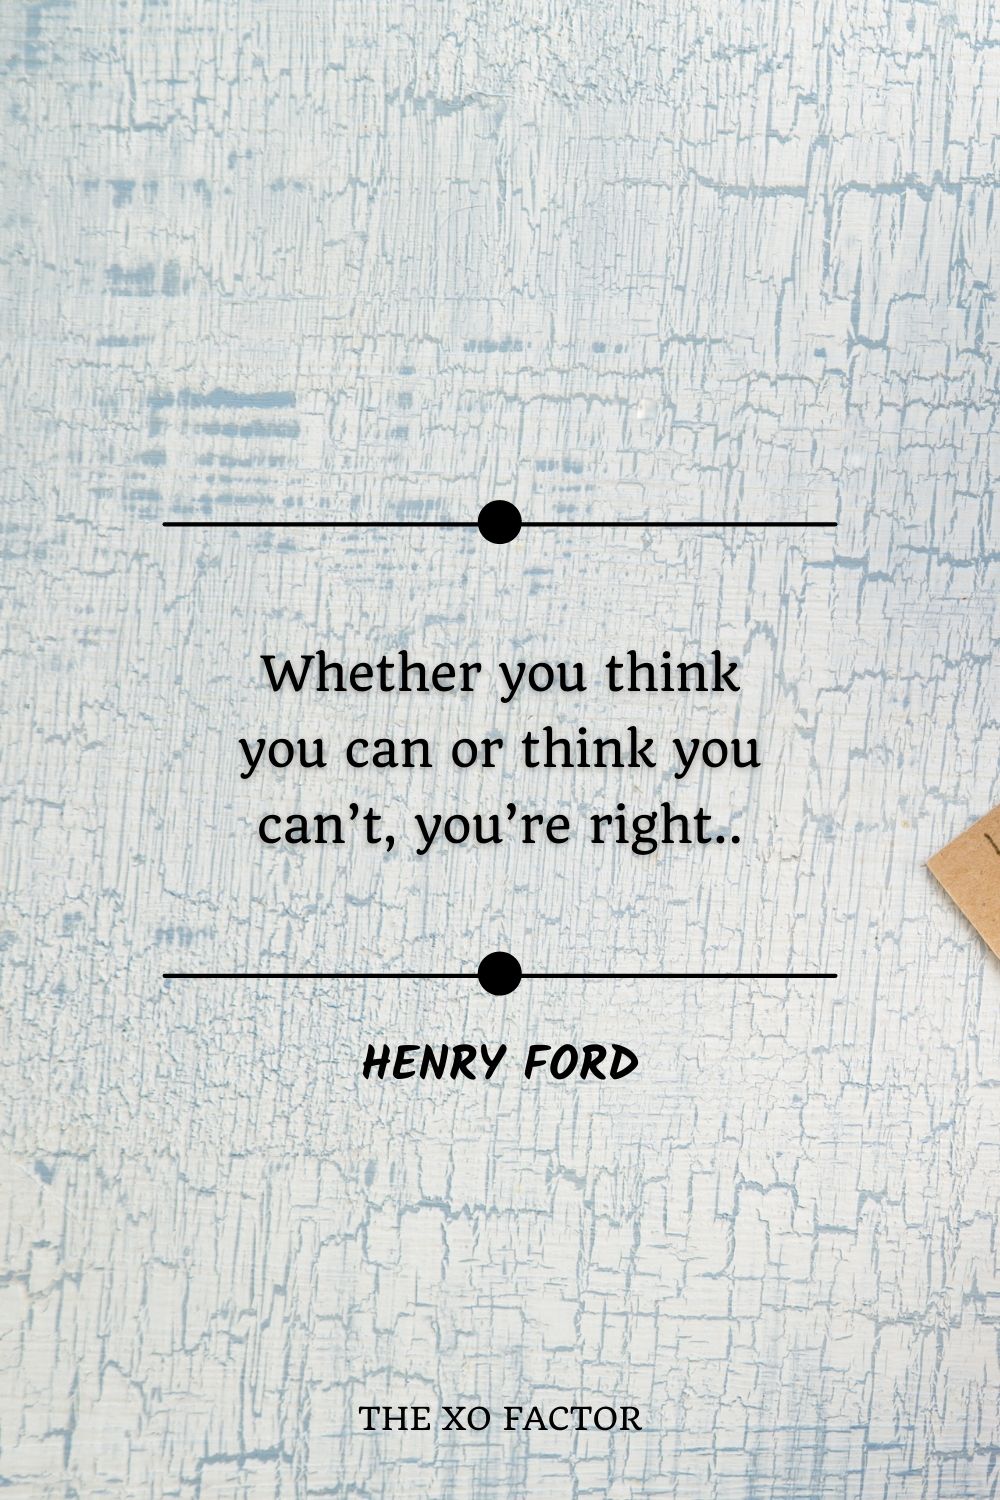 Whether you think you can or think you can’t, you’re right..” – Henry Ford